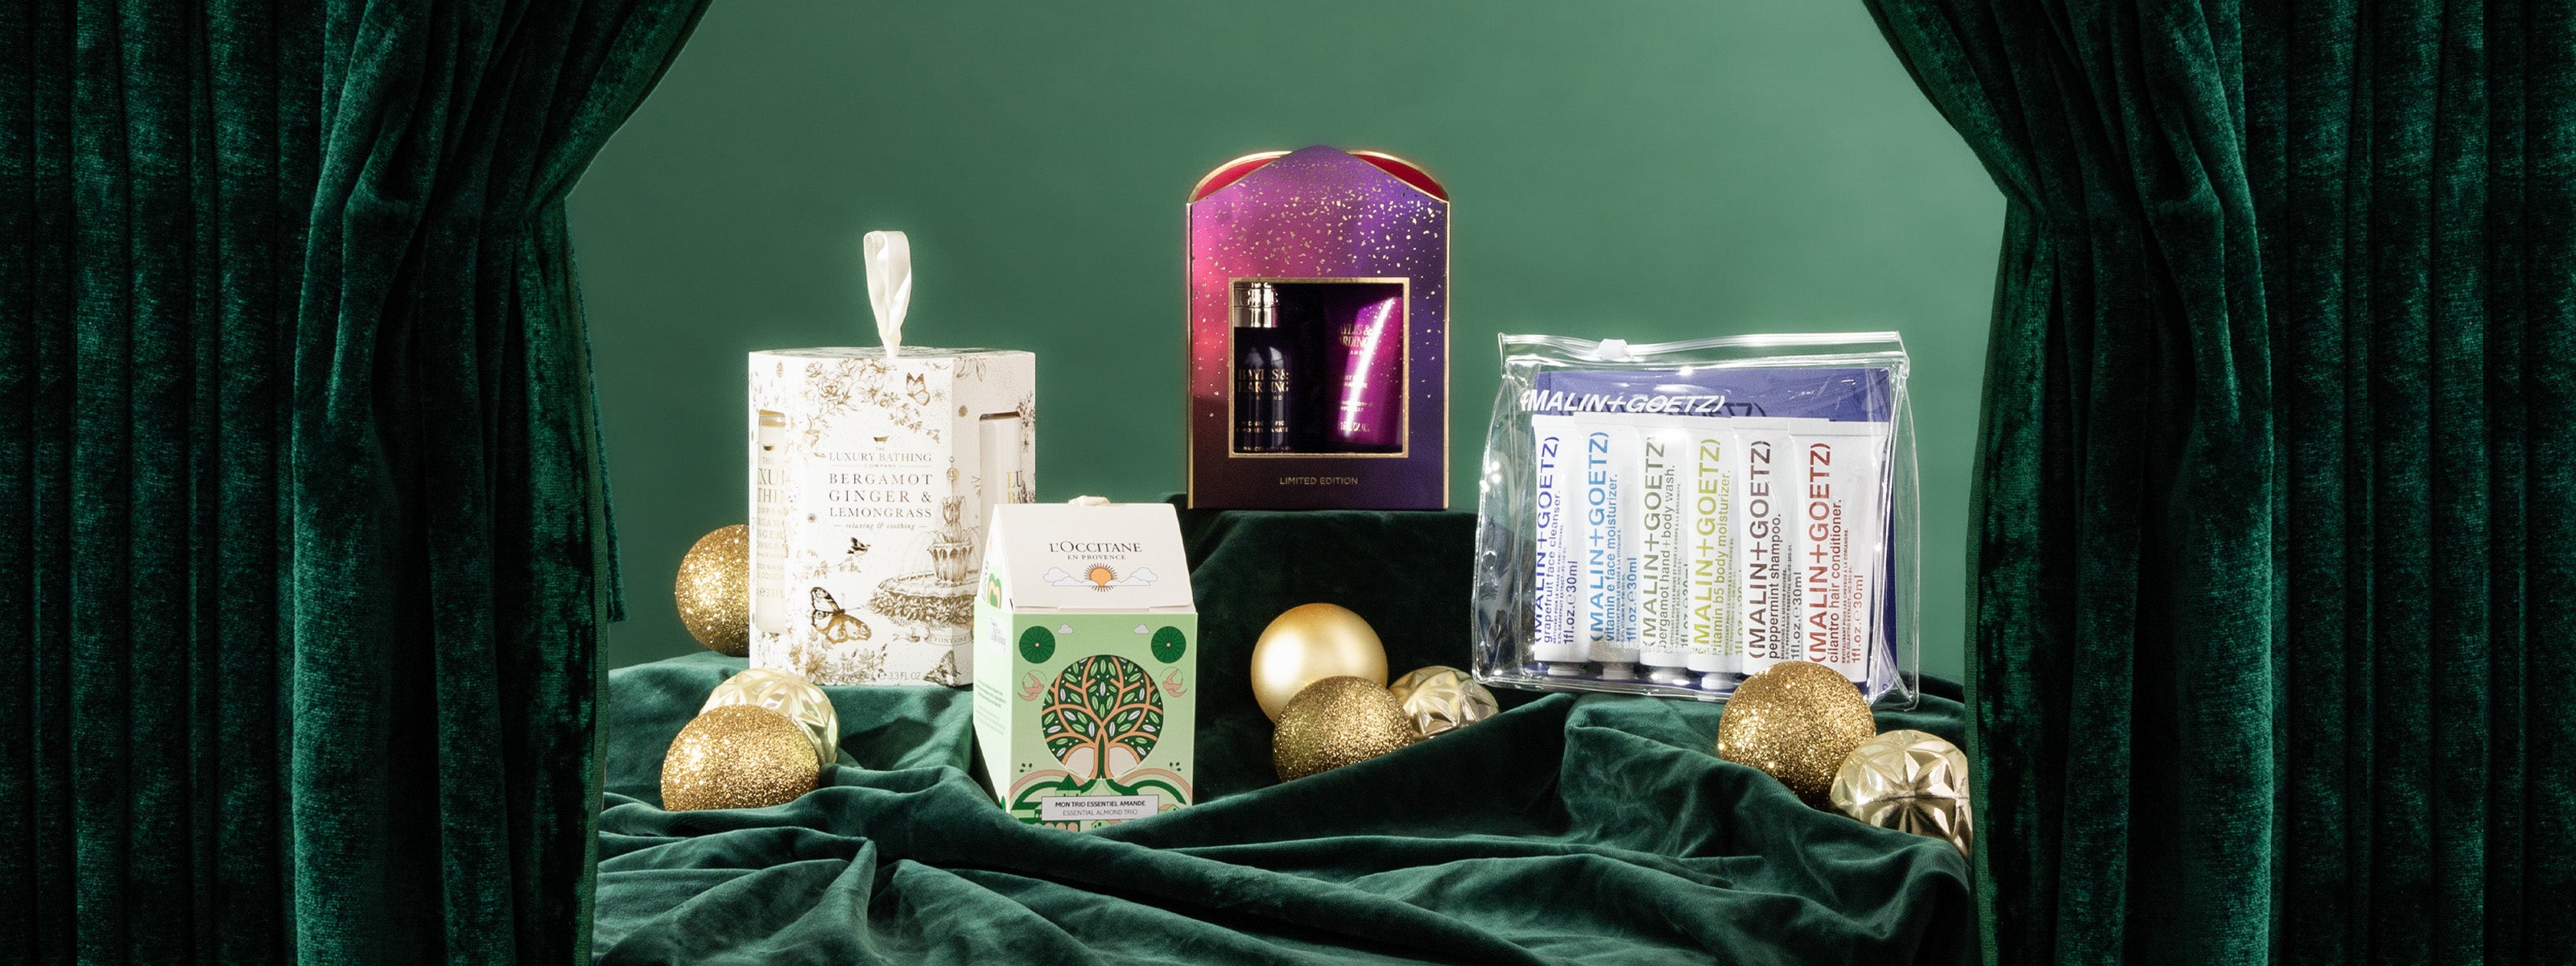 Christmas at Rustan’s: Beauty Gift Sets Under the Christmas Tree - Rustans.com